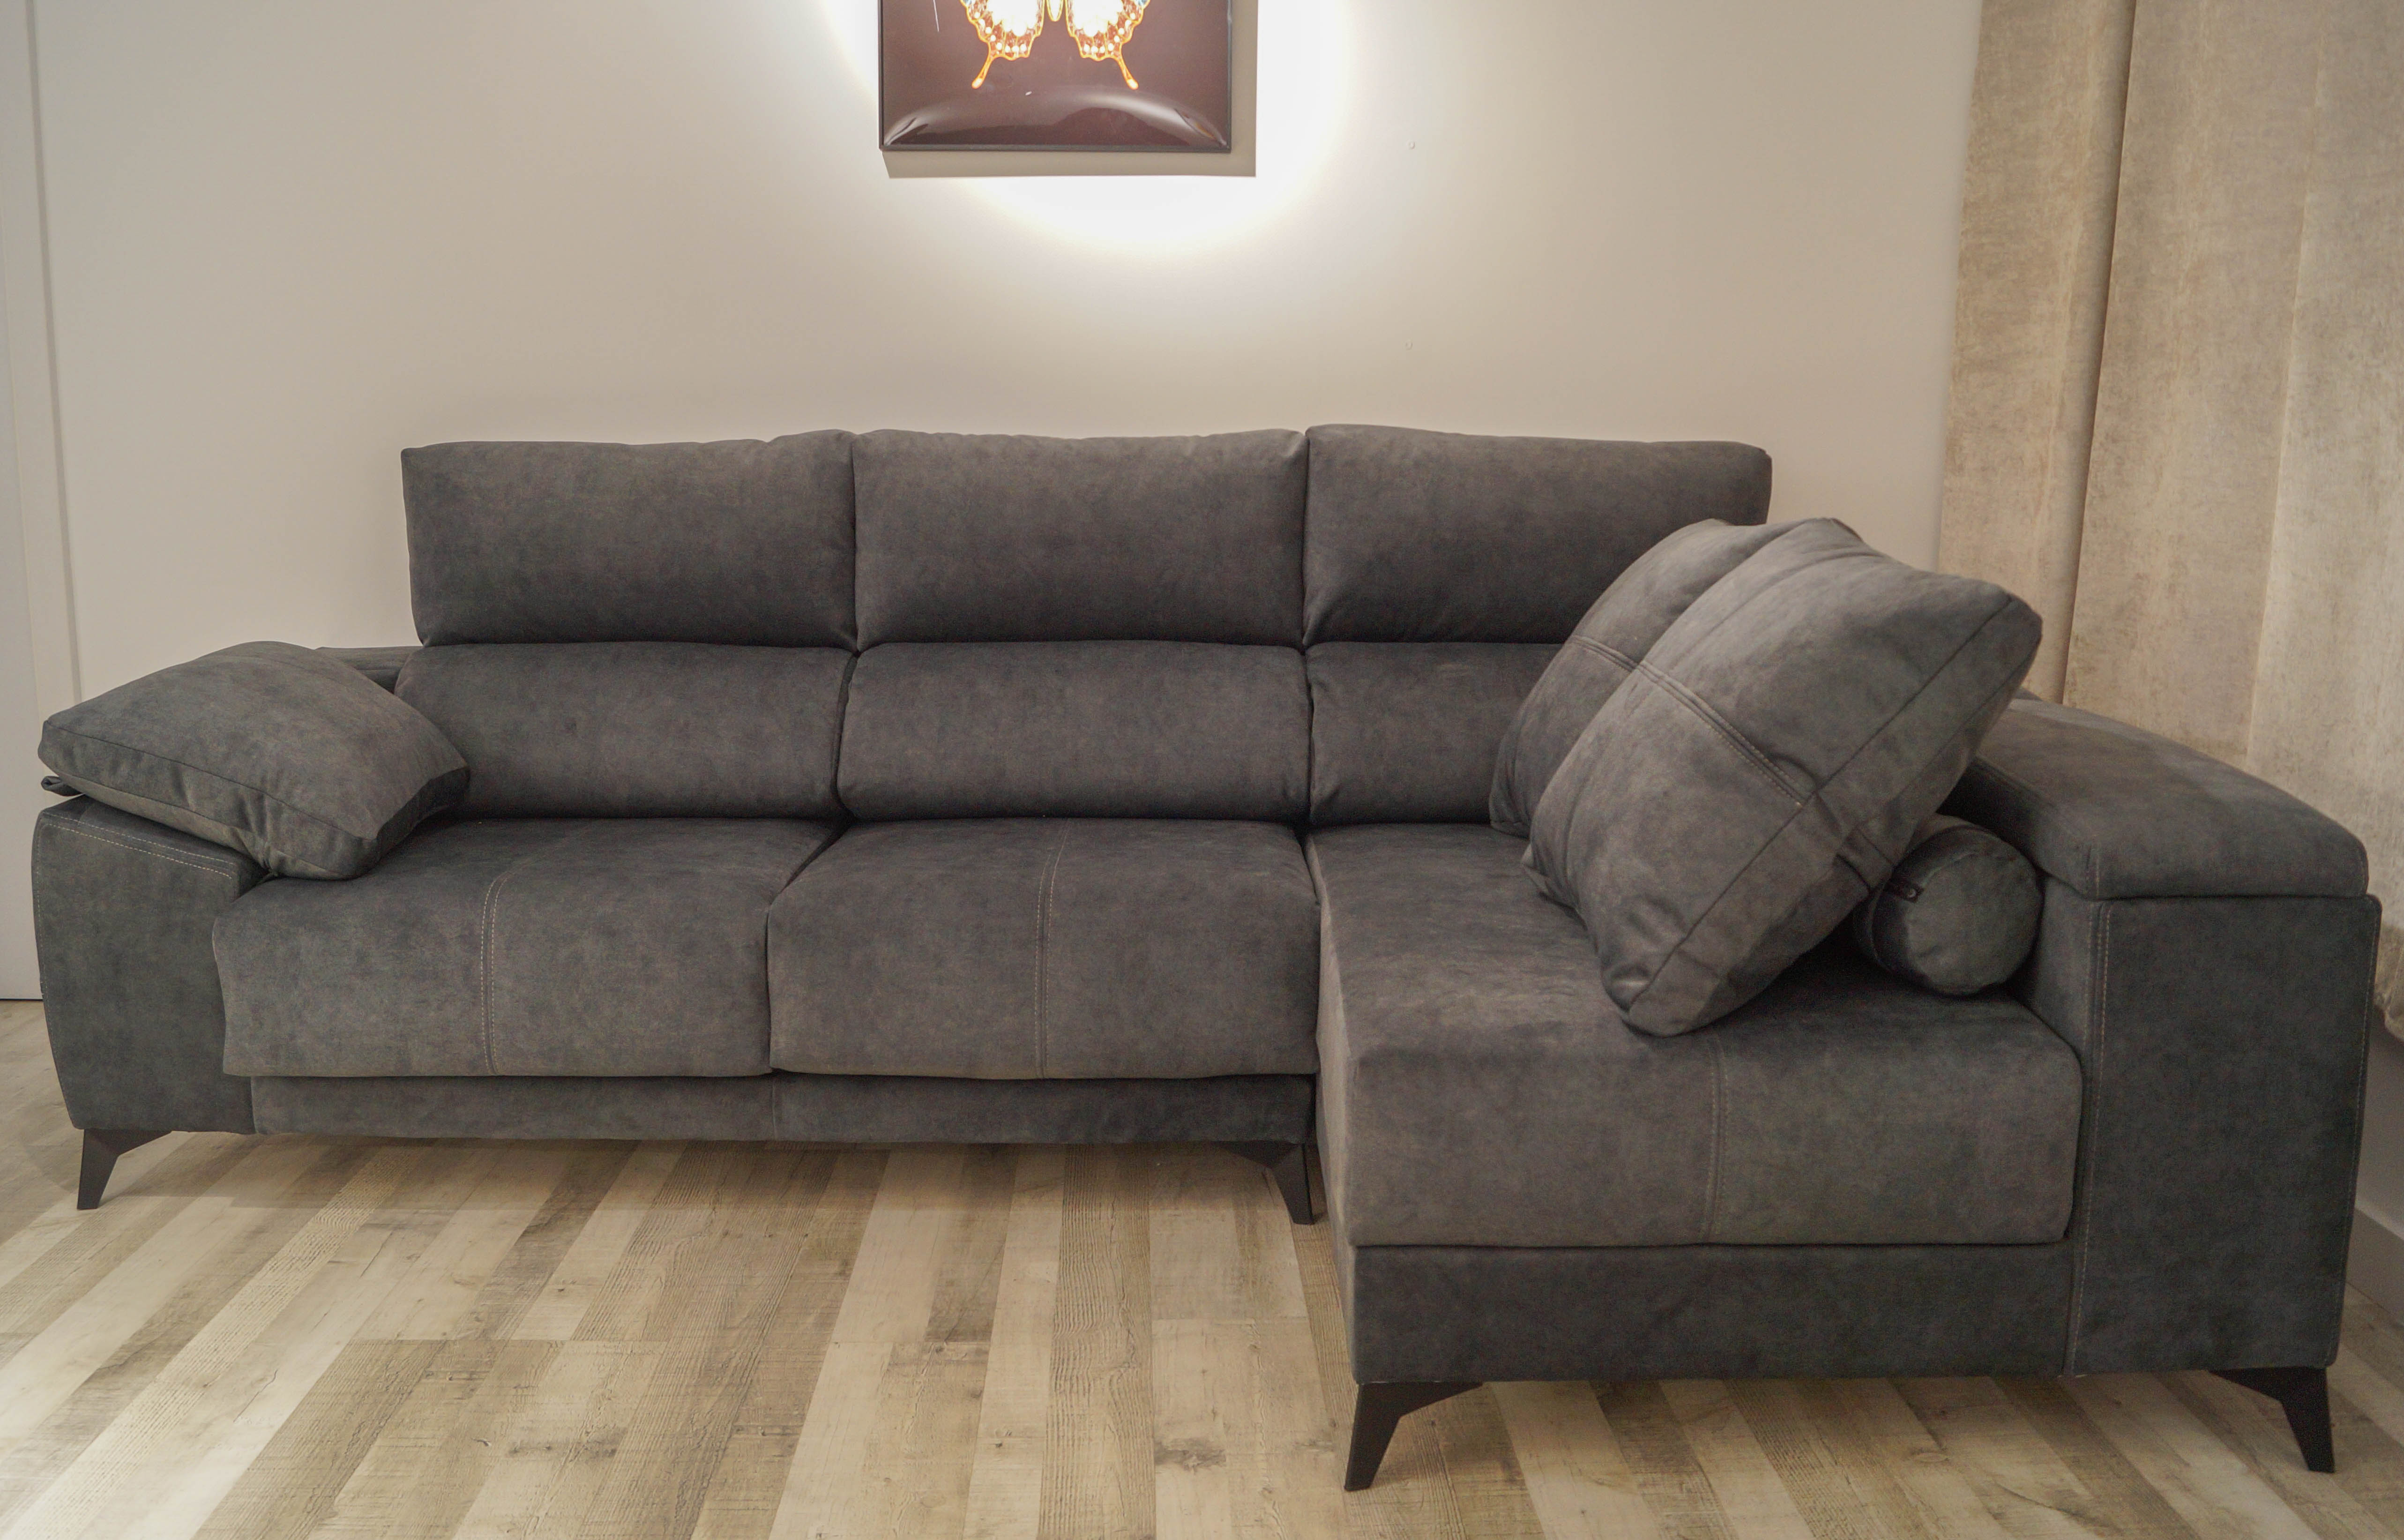 Chaise longue sofa with short arm chest, sliding seats with Paris reclining  heads.